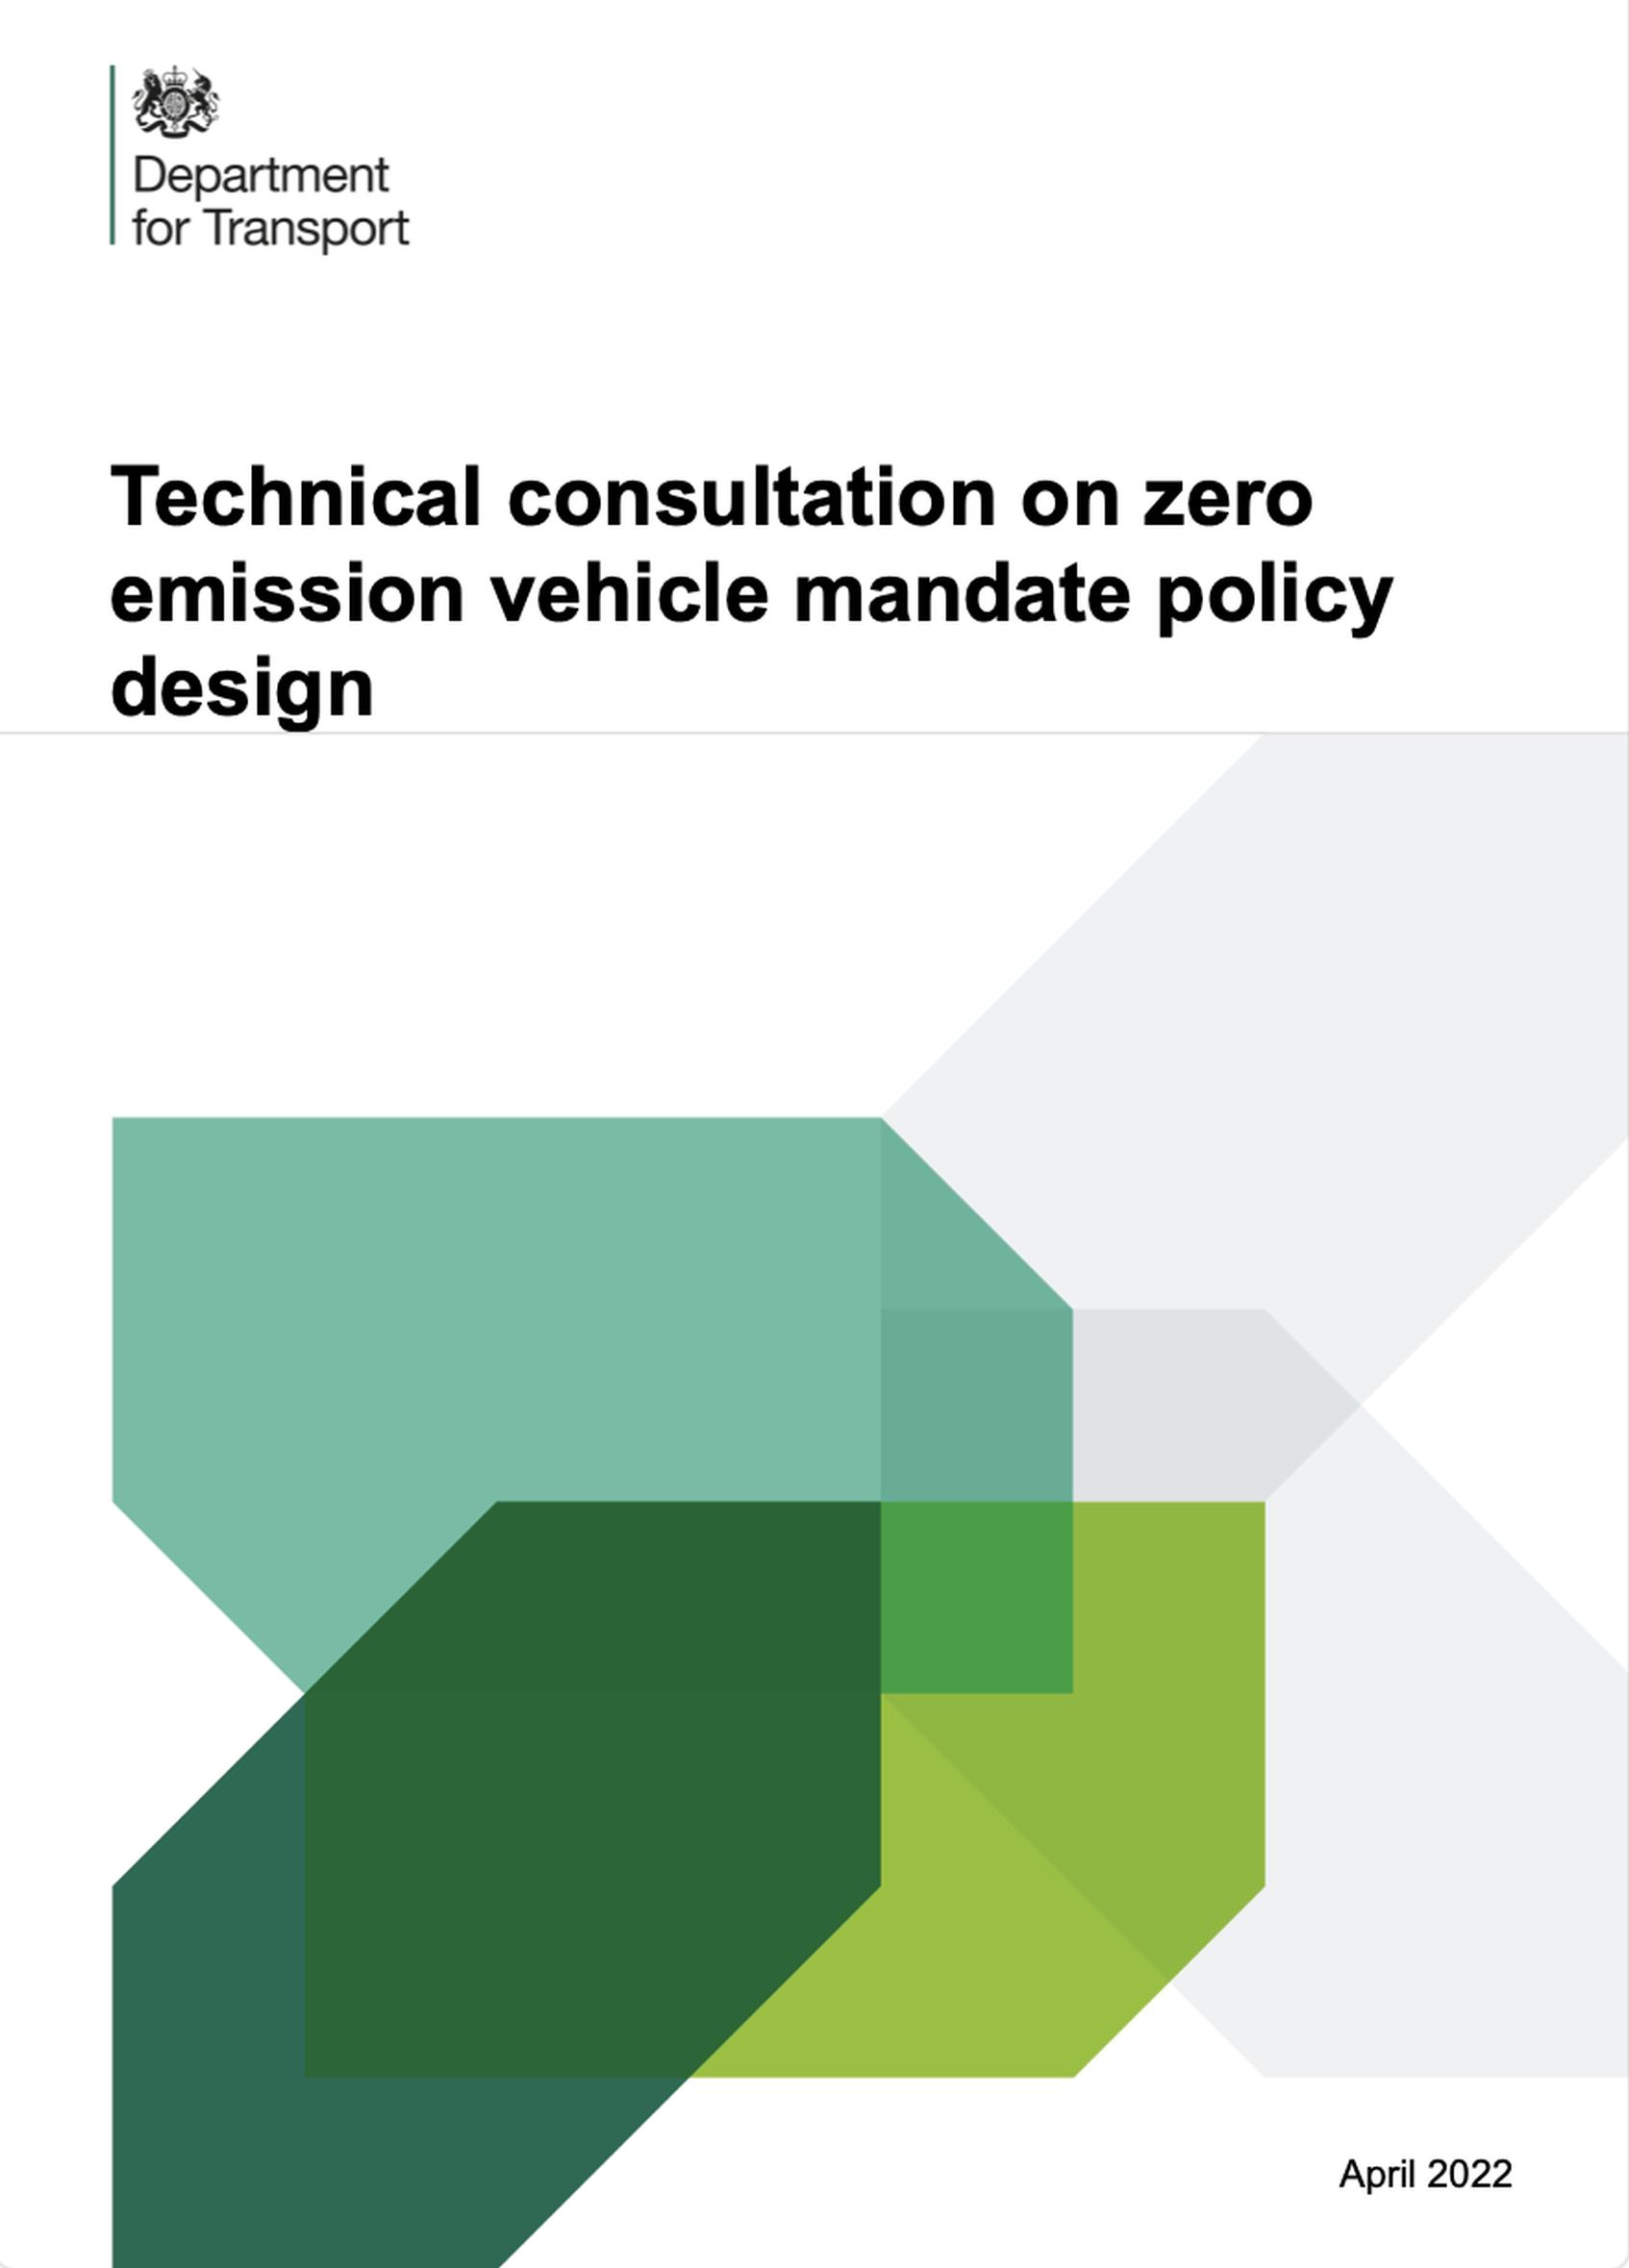 DfT consults on policy design features for zero emission vehicle (ZEV) mandate